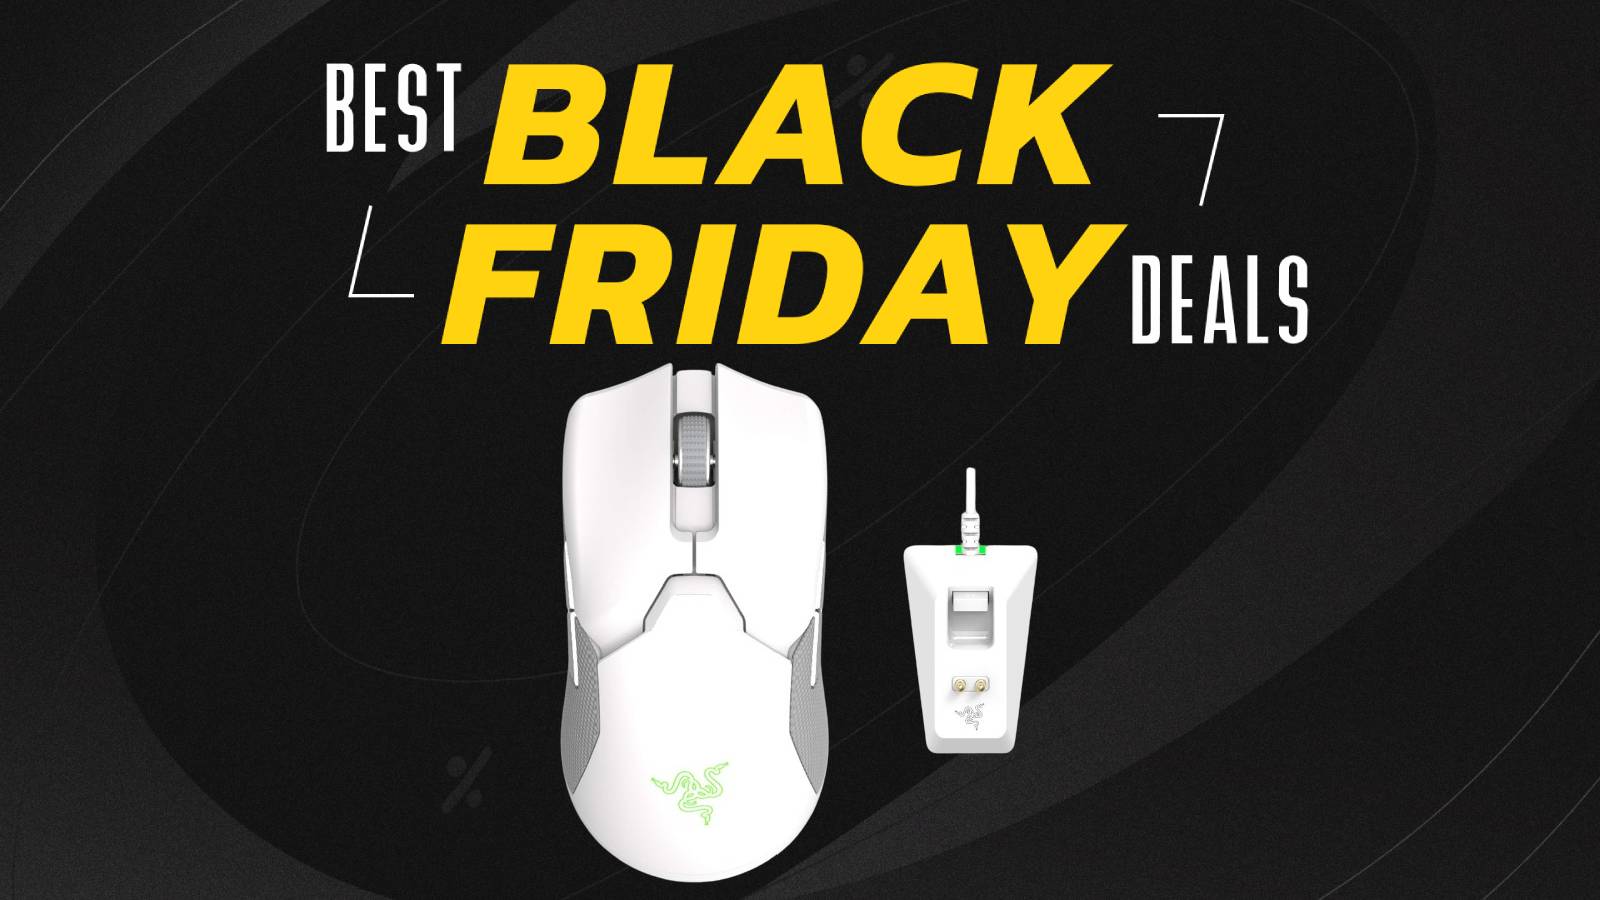 Deal Alert: Save 50% Off the Razer Viper Ultimate Wireless Gaming